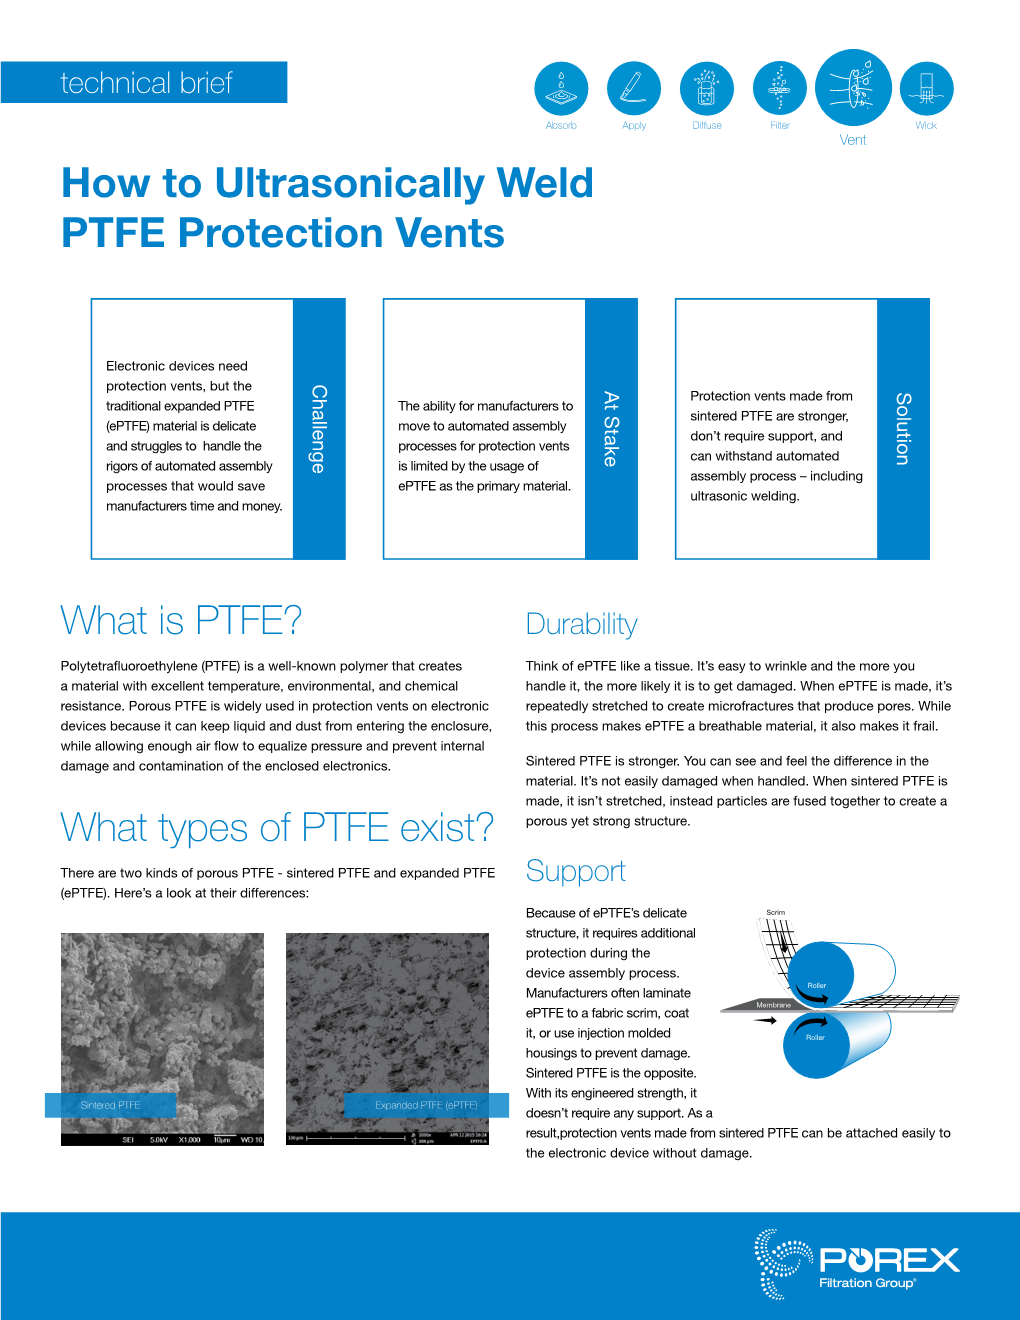 How to Ultrasonically Weld PTFE Protection Vents